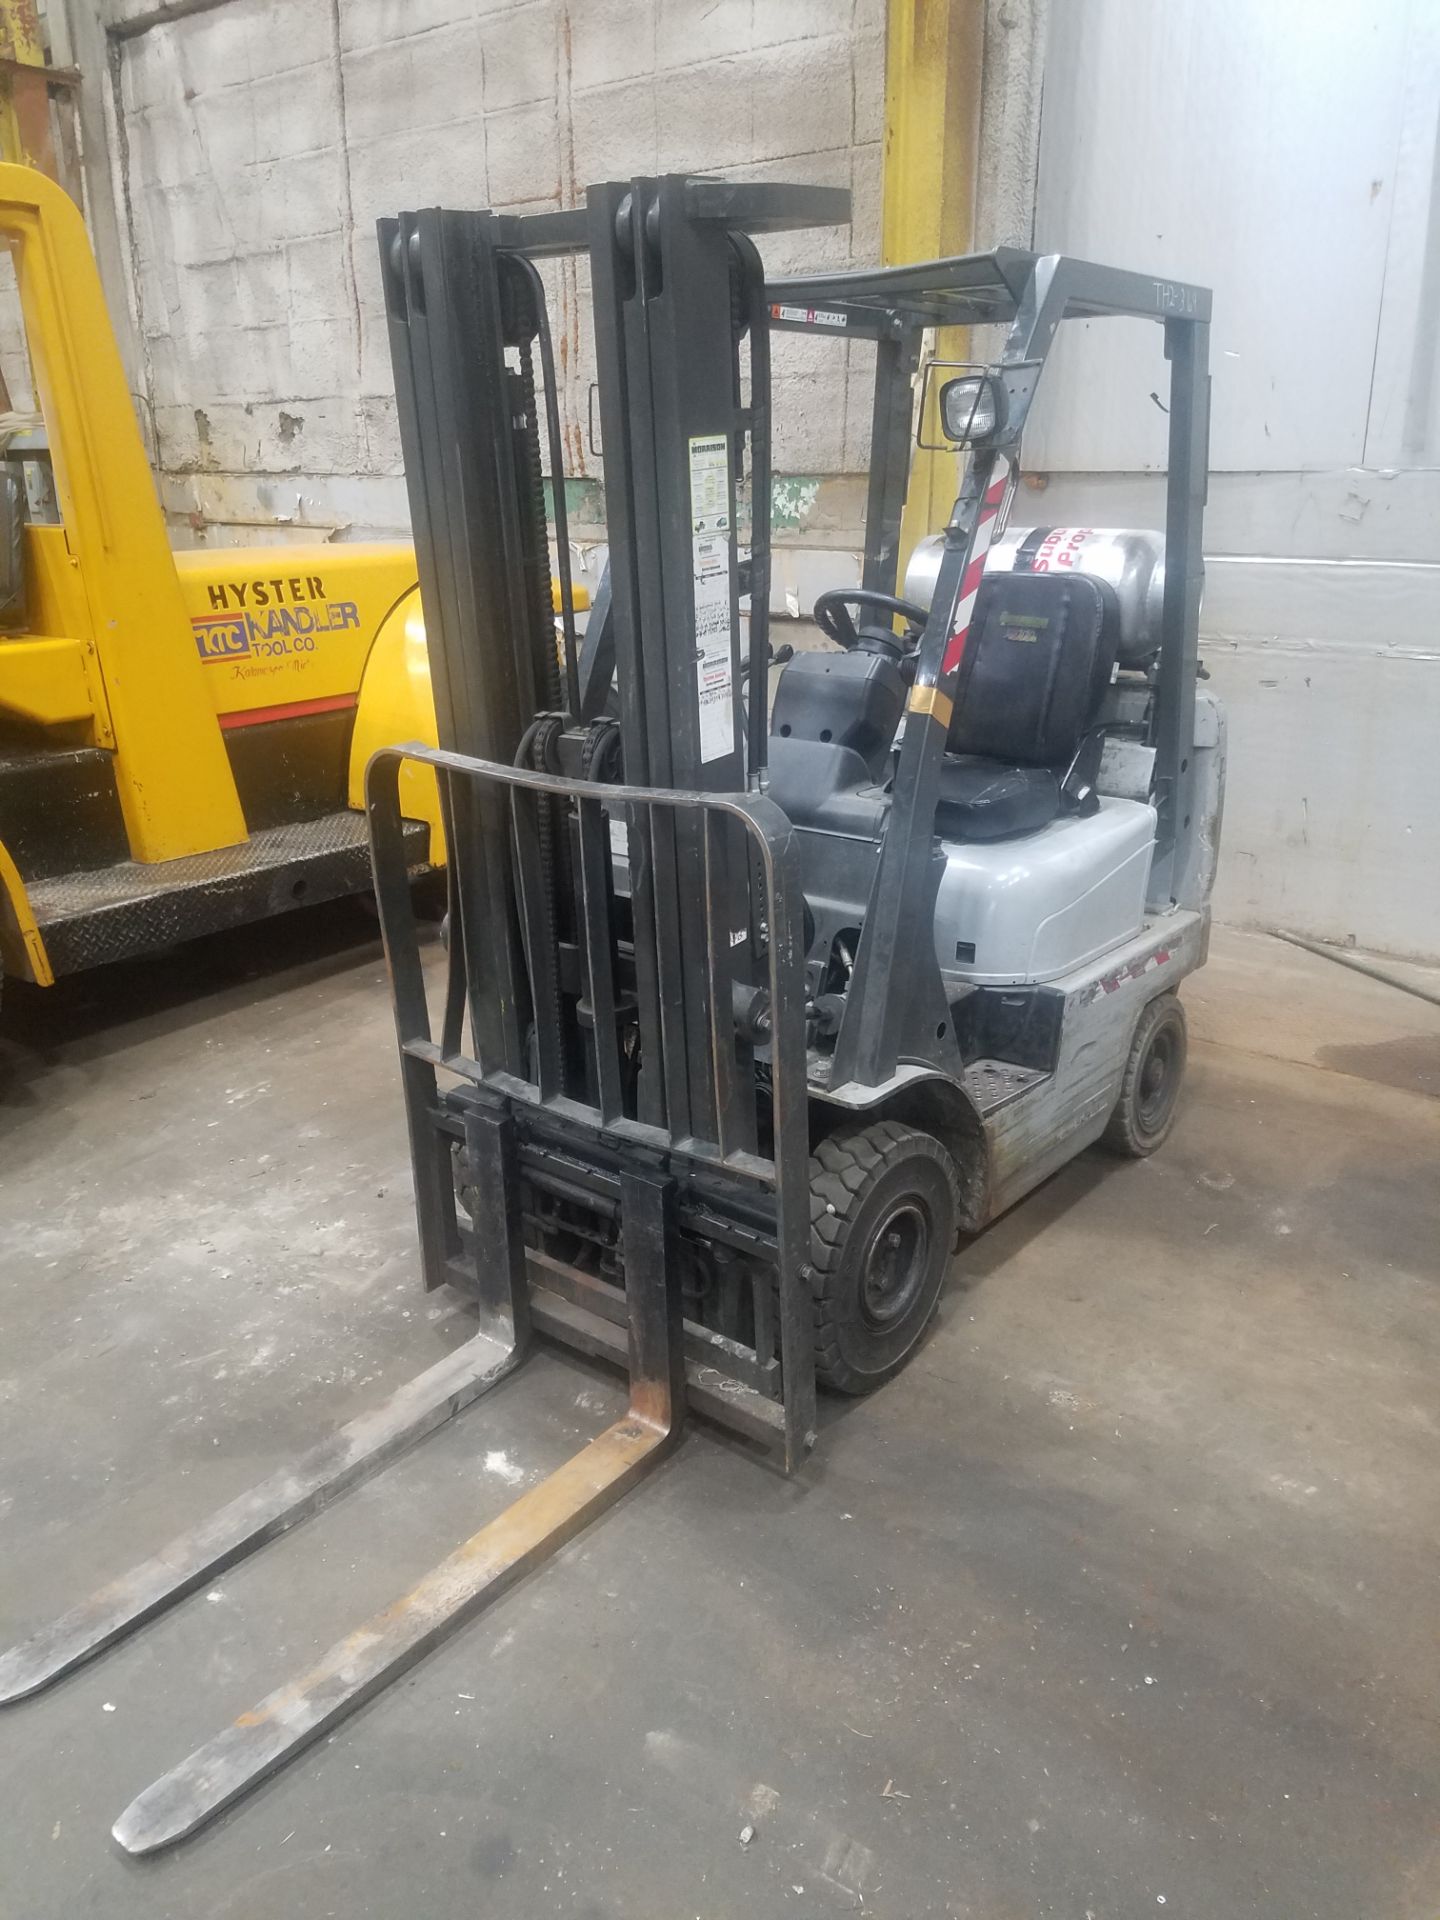 Nissan Model MAP1F1A15LV Fork Lift, s/n AP1F1-9T0369, 2,400 Lb. Capacity, LP, Hard Tire, Cage, - Image 4 of 4